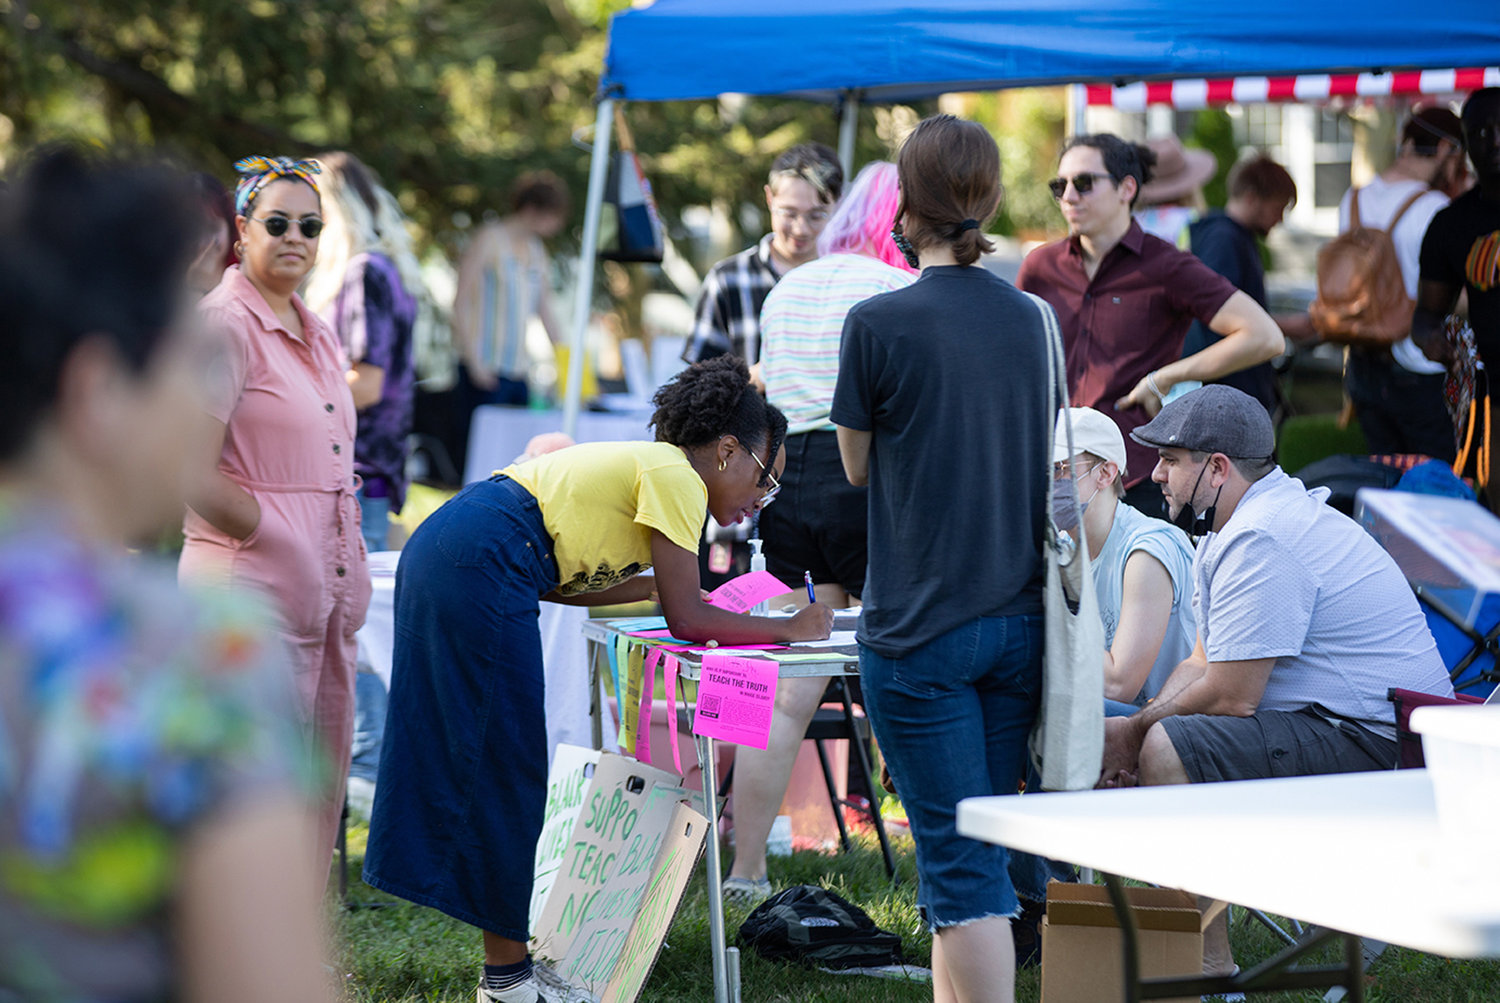 Art vendors take over Dexter Park once a month for Haus of Codec’s LGBTQQIA+ markets